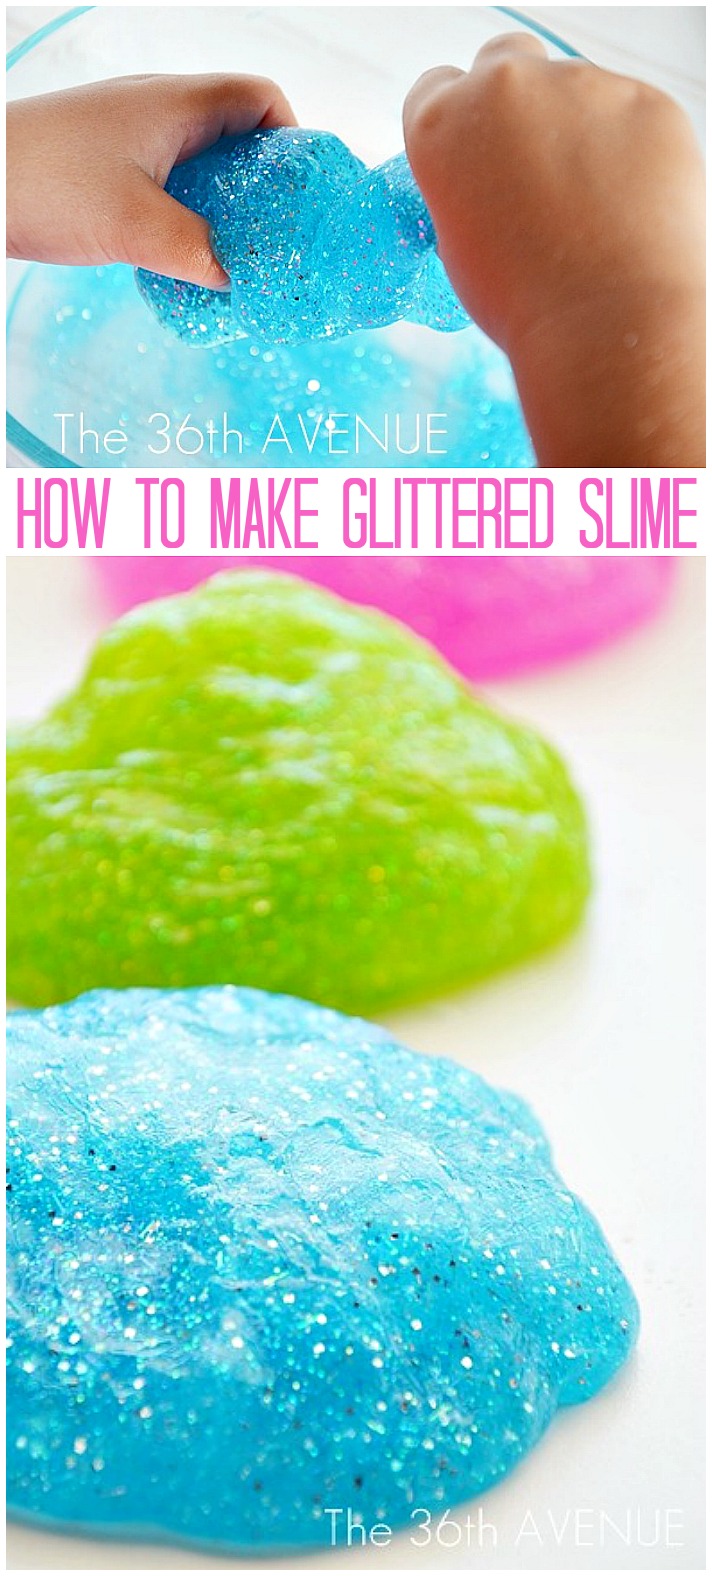 How to make glittered slime the36thavenue.com